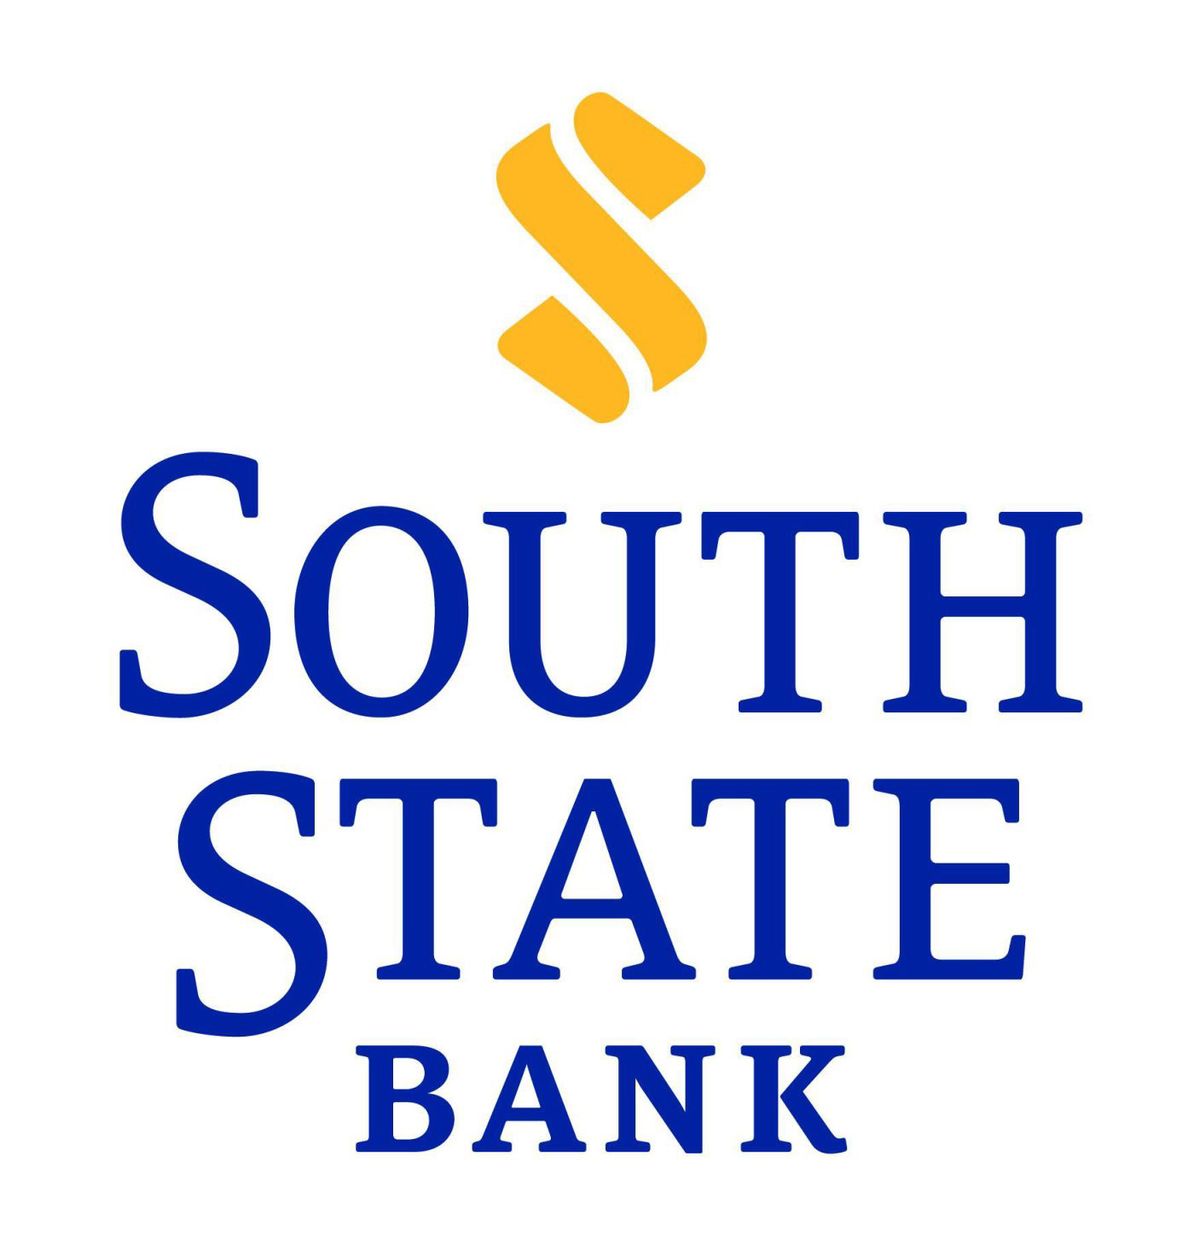 South State Bank has announced that it is expanding its team and presence with the addition of eight Richmond, Va.-based mortgage team members: Paul Carioti, John Gregory, Todd Kern, Kendra Lengua, Michelle Melton, Shellee Mildrum, Hang Shaia and Iris Vog